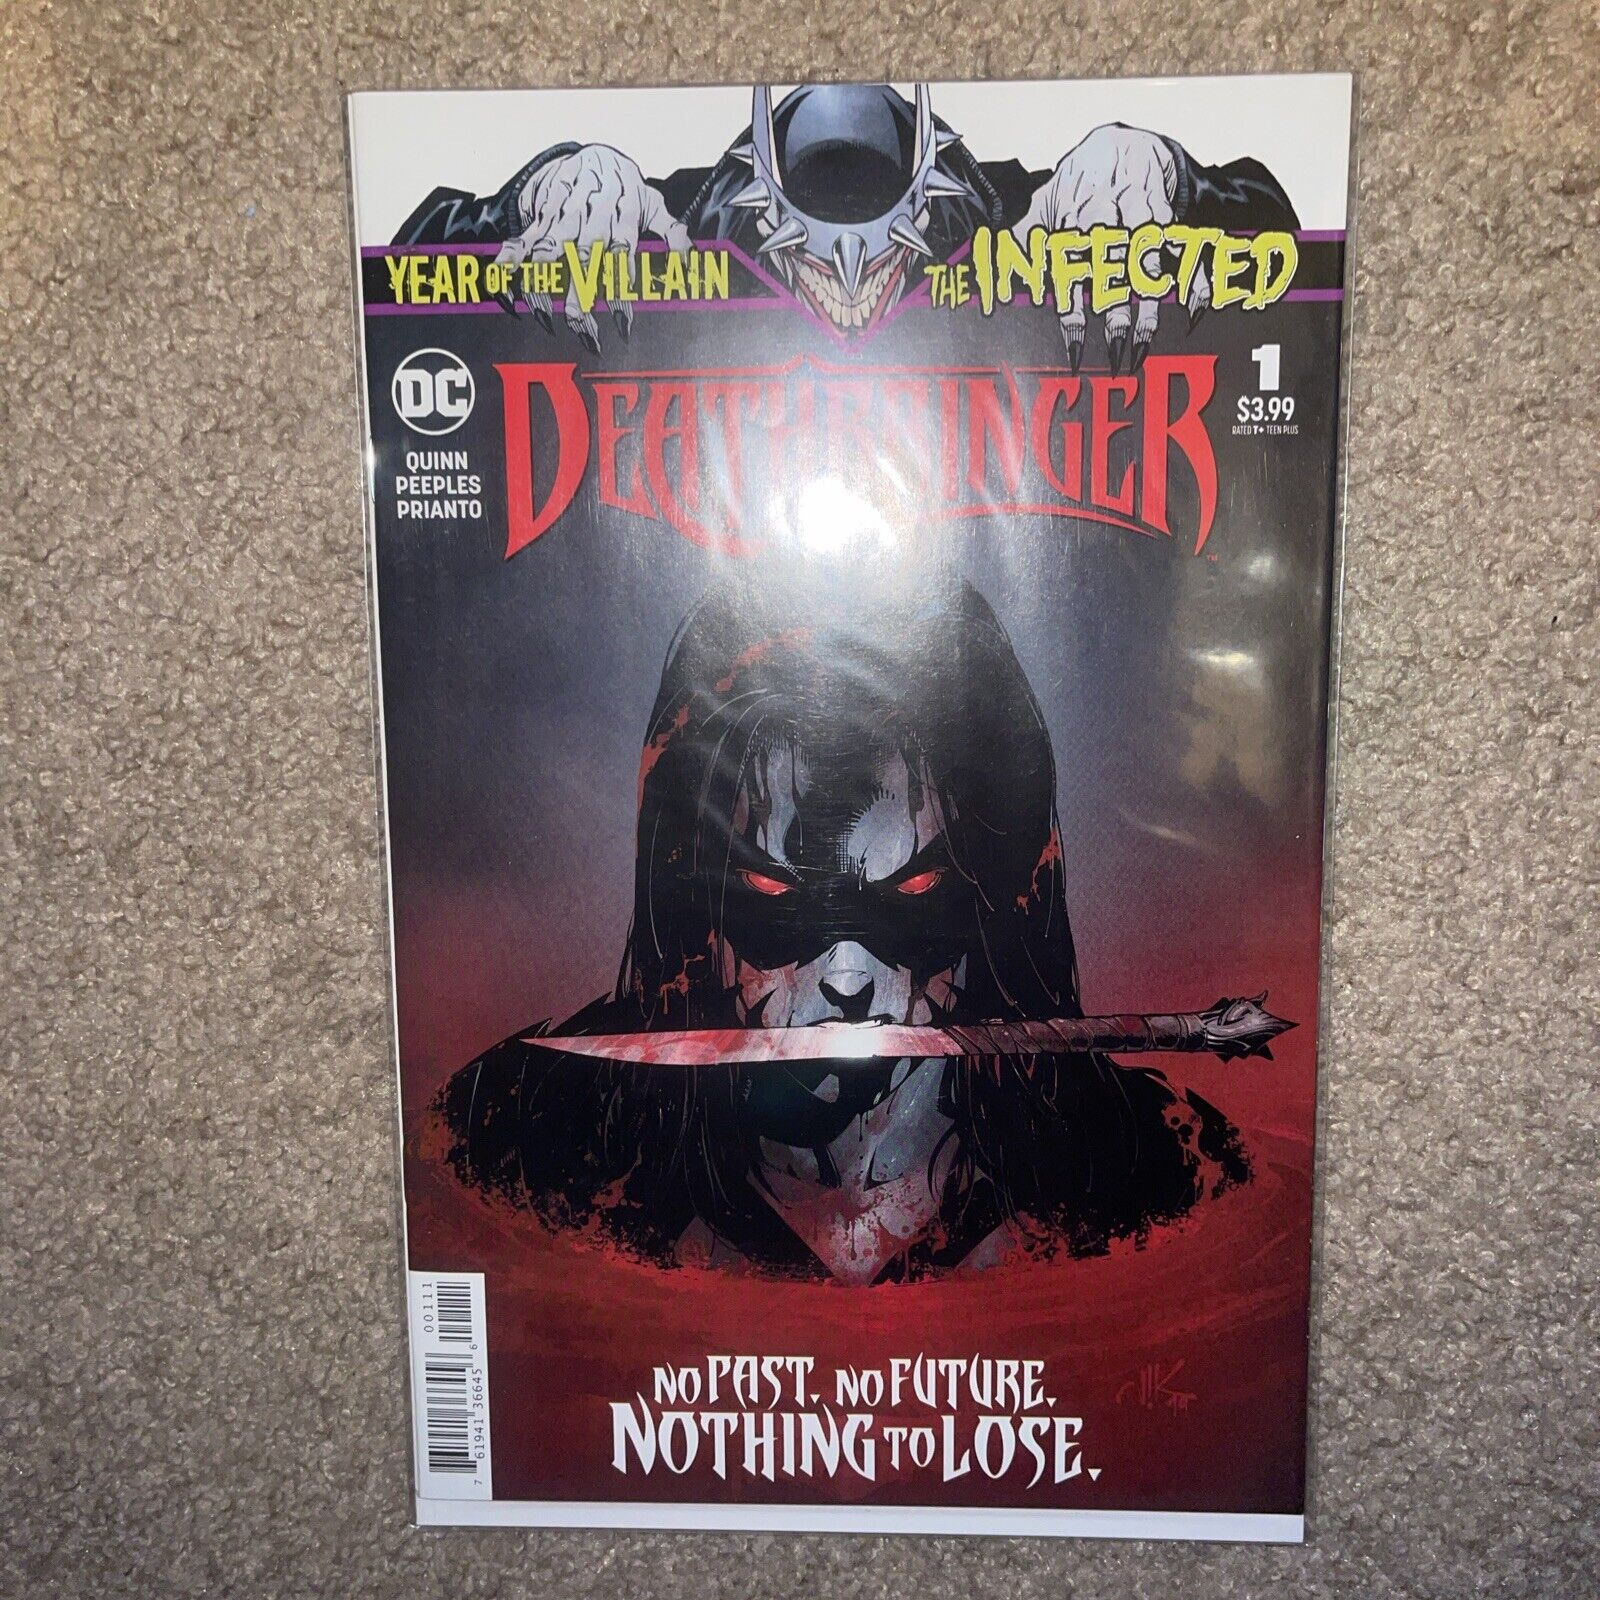 The Infected: Deathbringer #1 (DC Comics, February 2020)